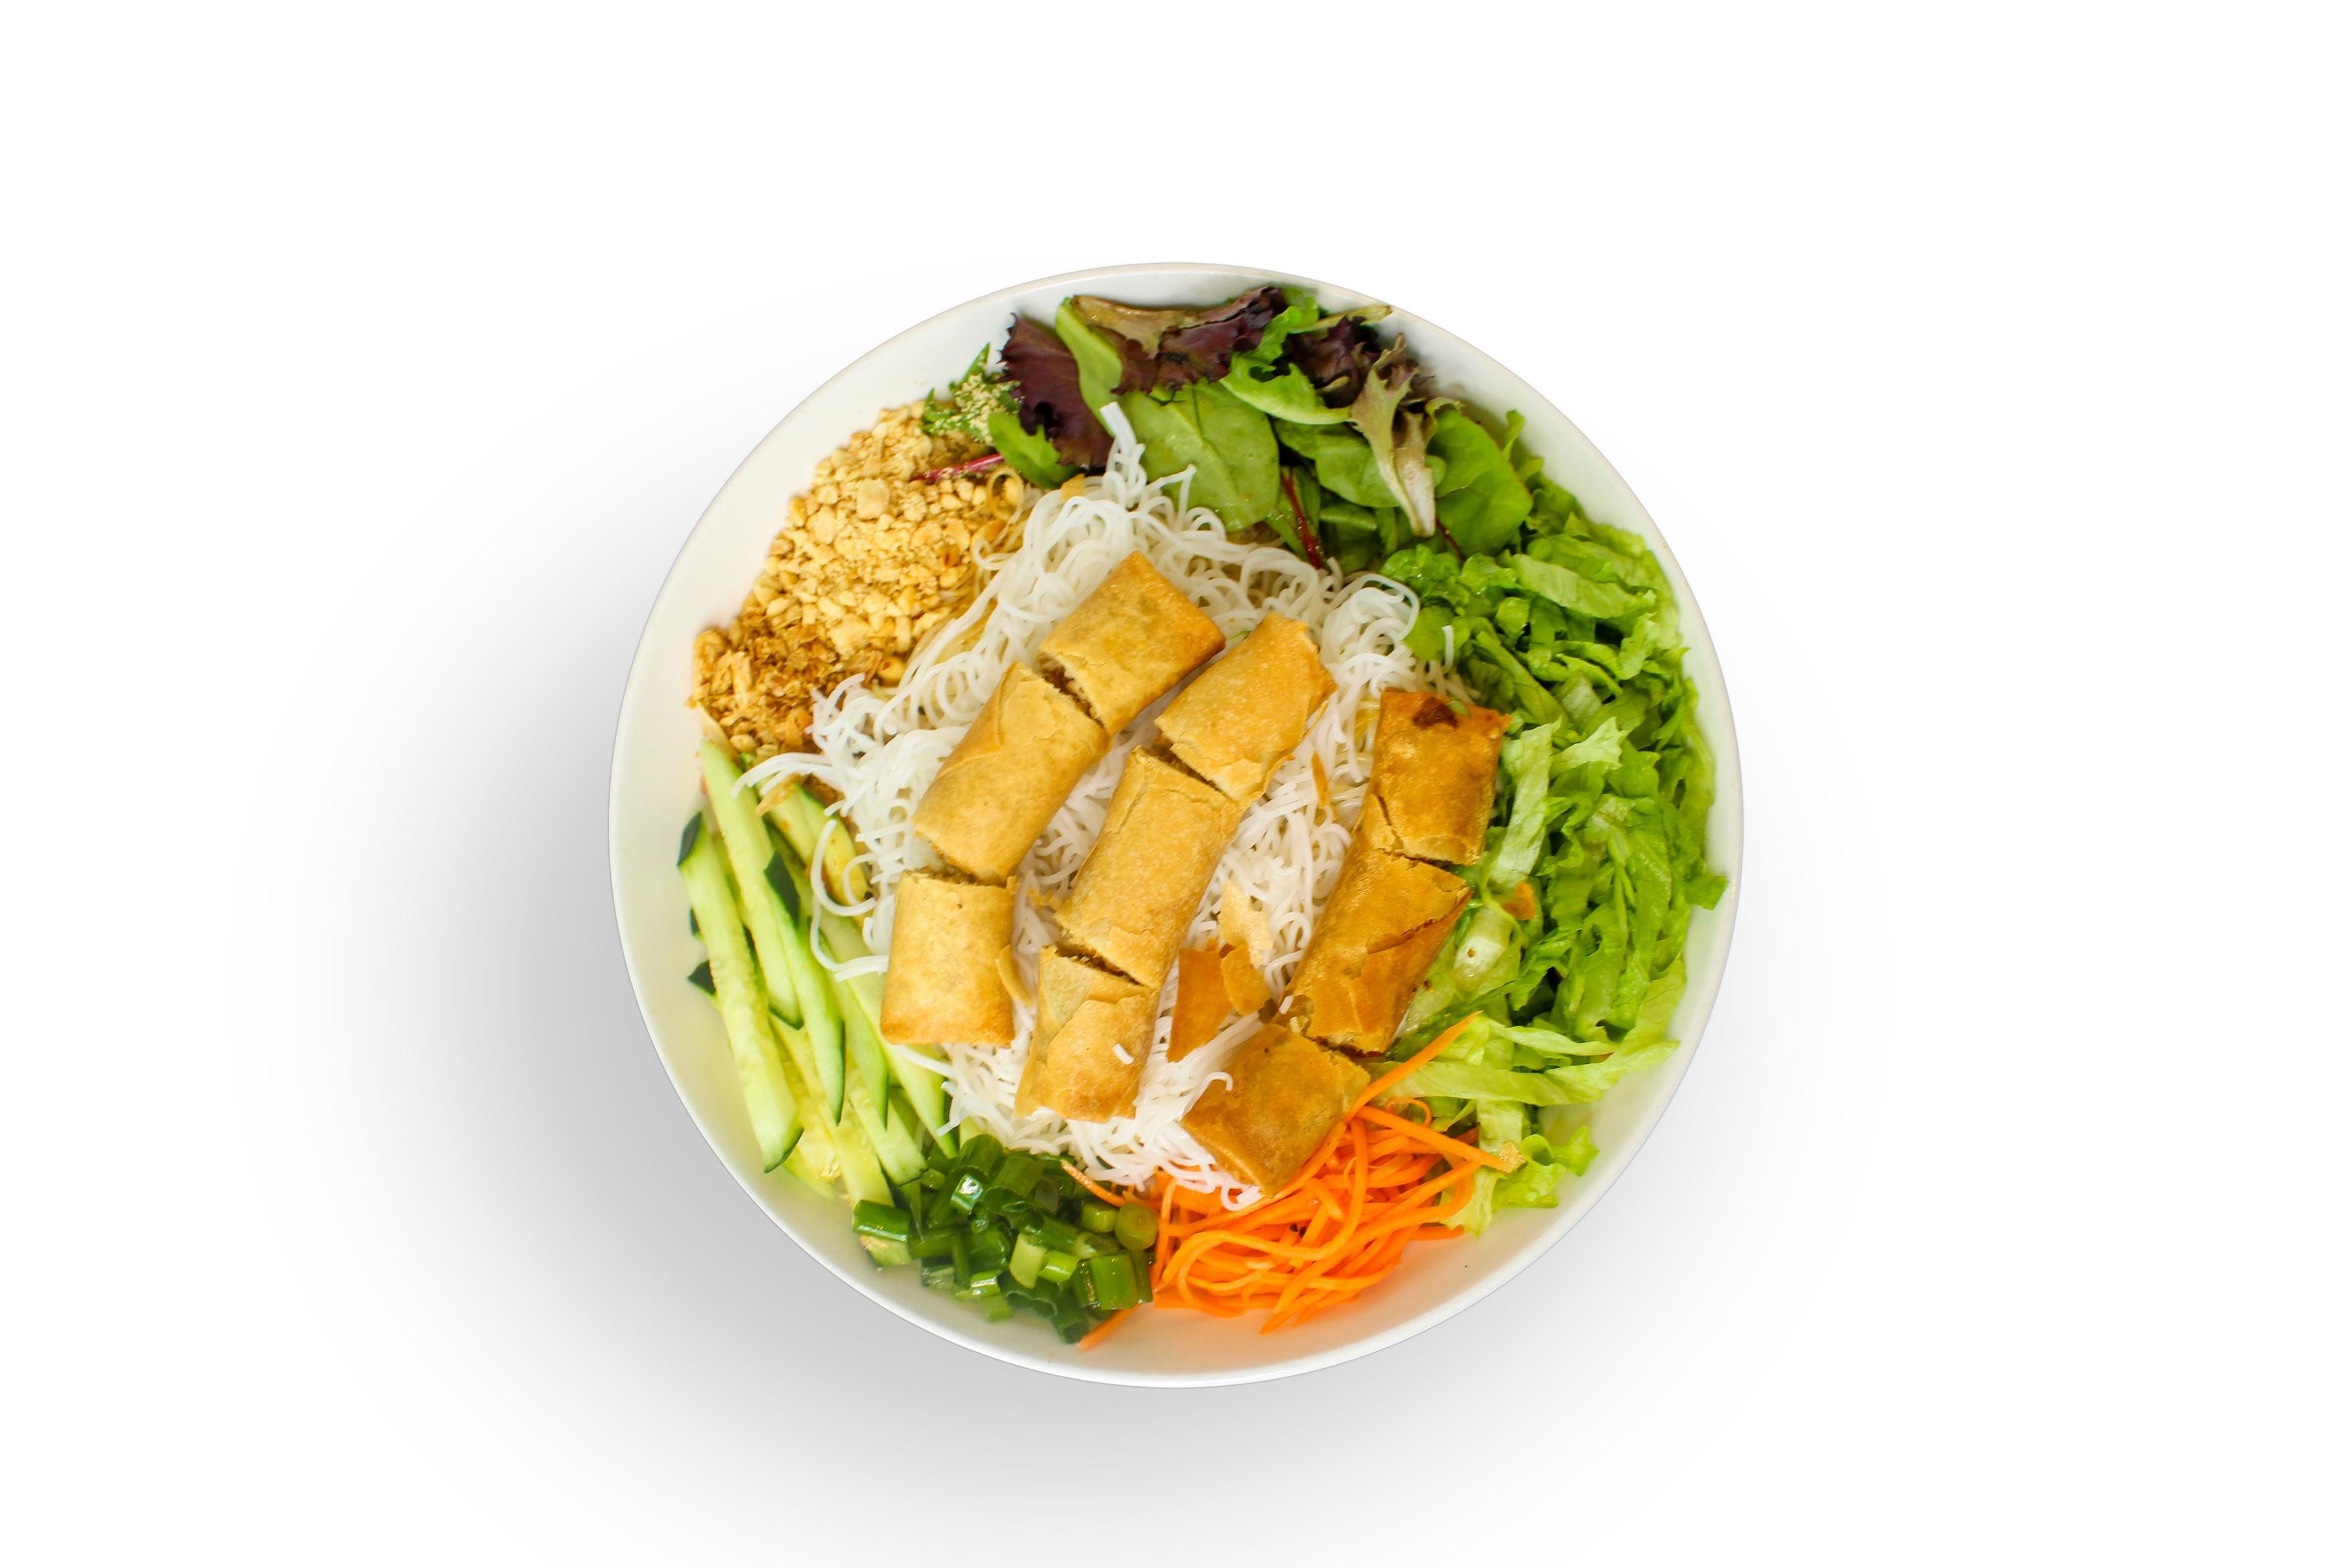 Vermicelli - Charbroiled Chicken